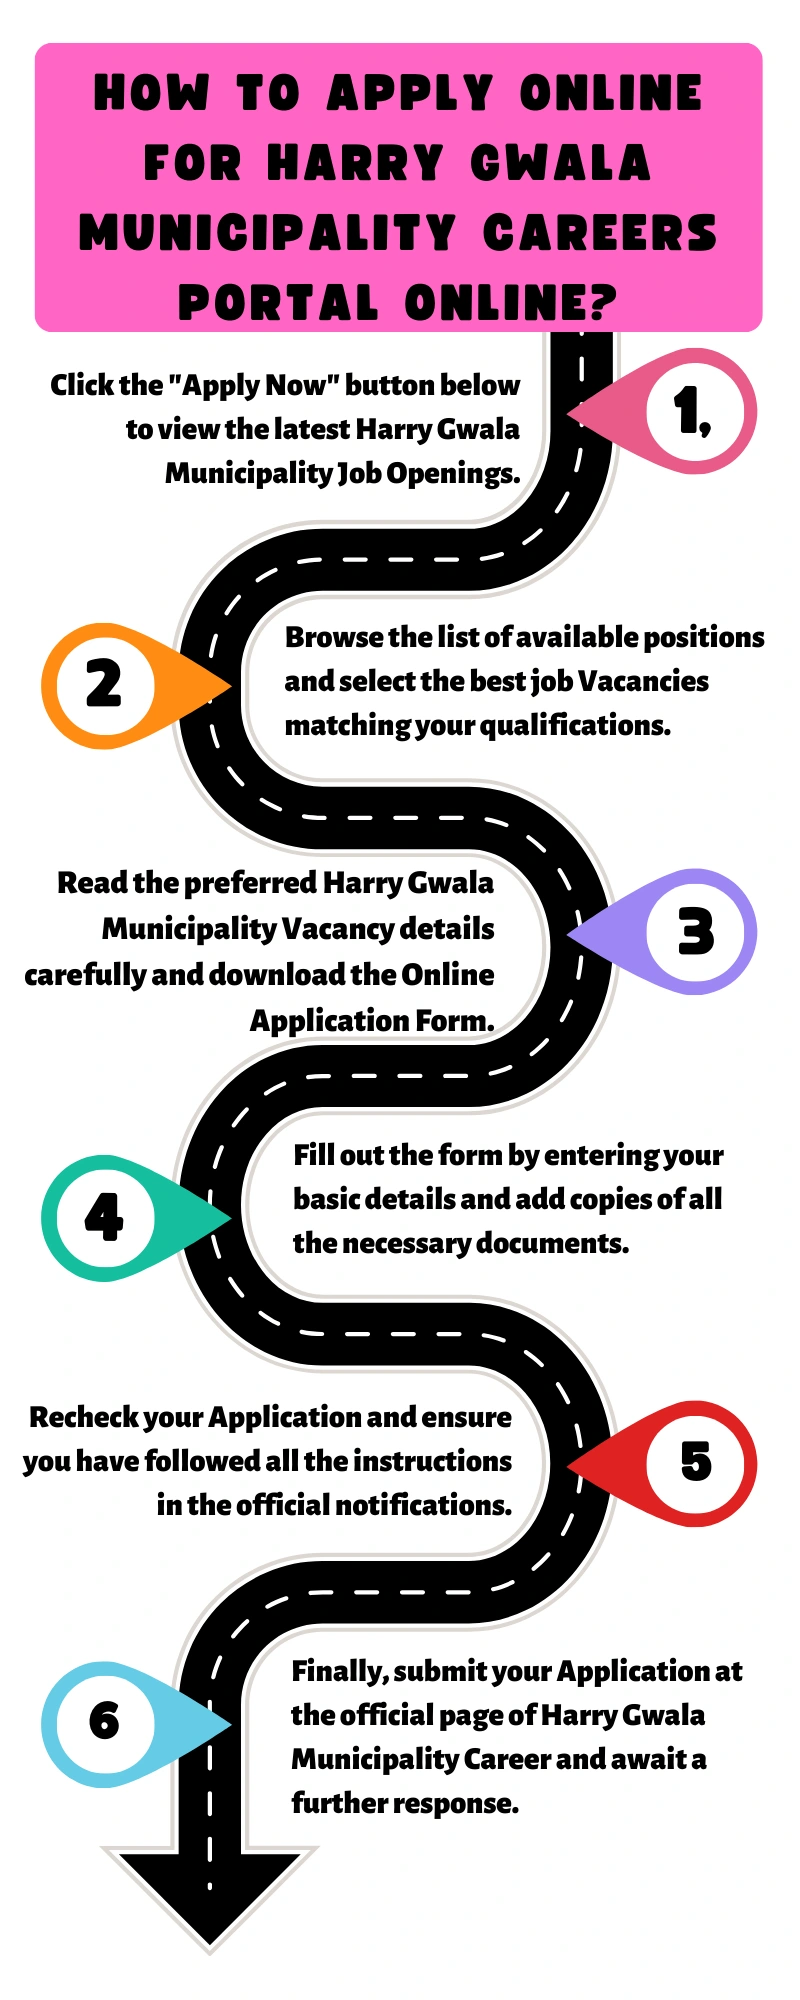 How to Apply online for Harry Gwala Municipality Careers Portal Online?